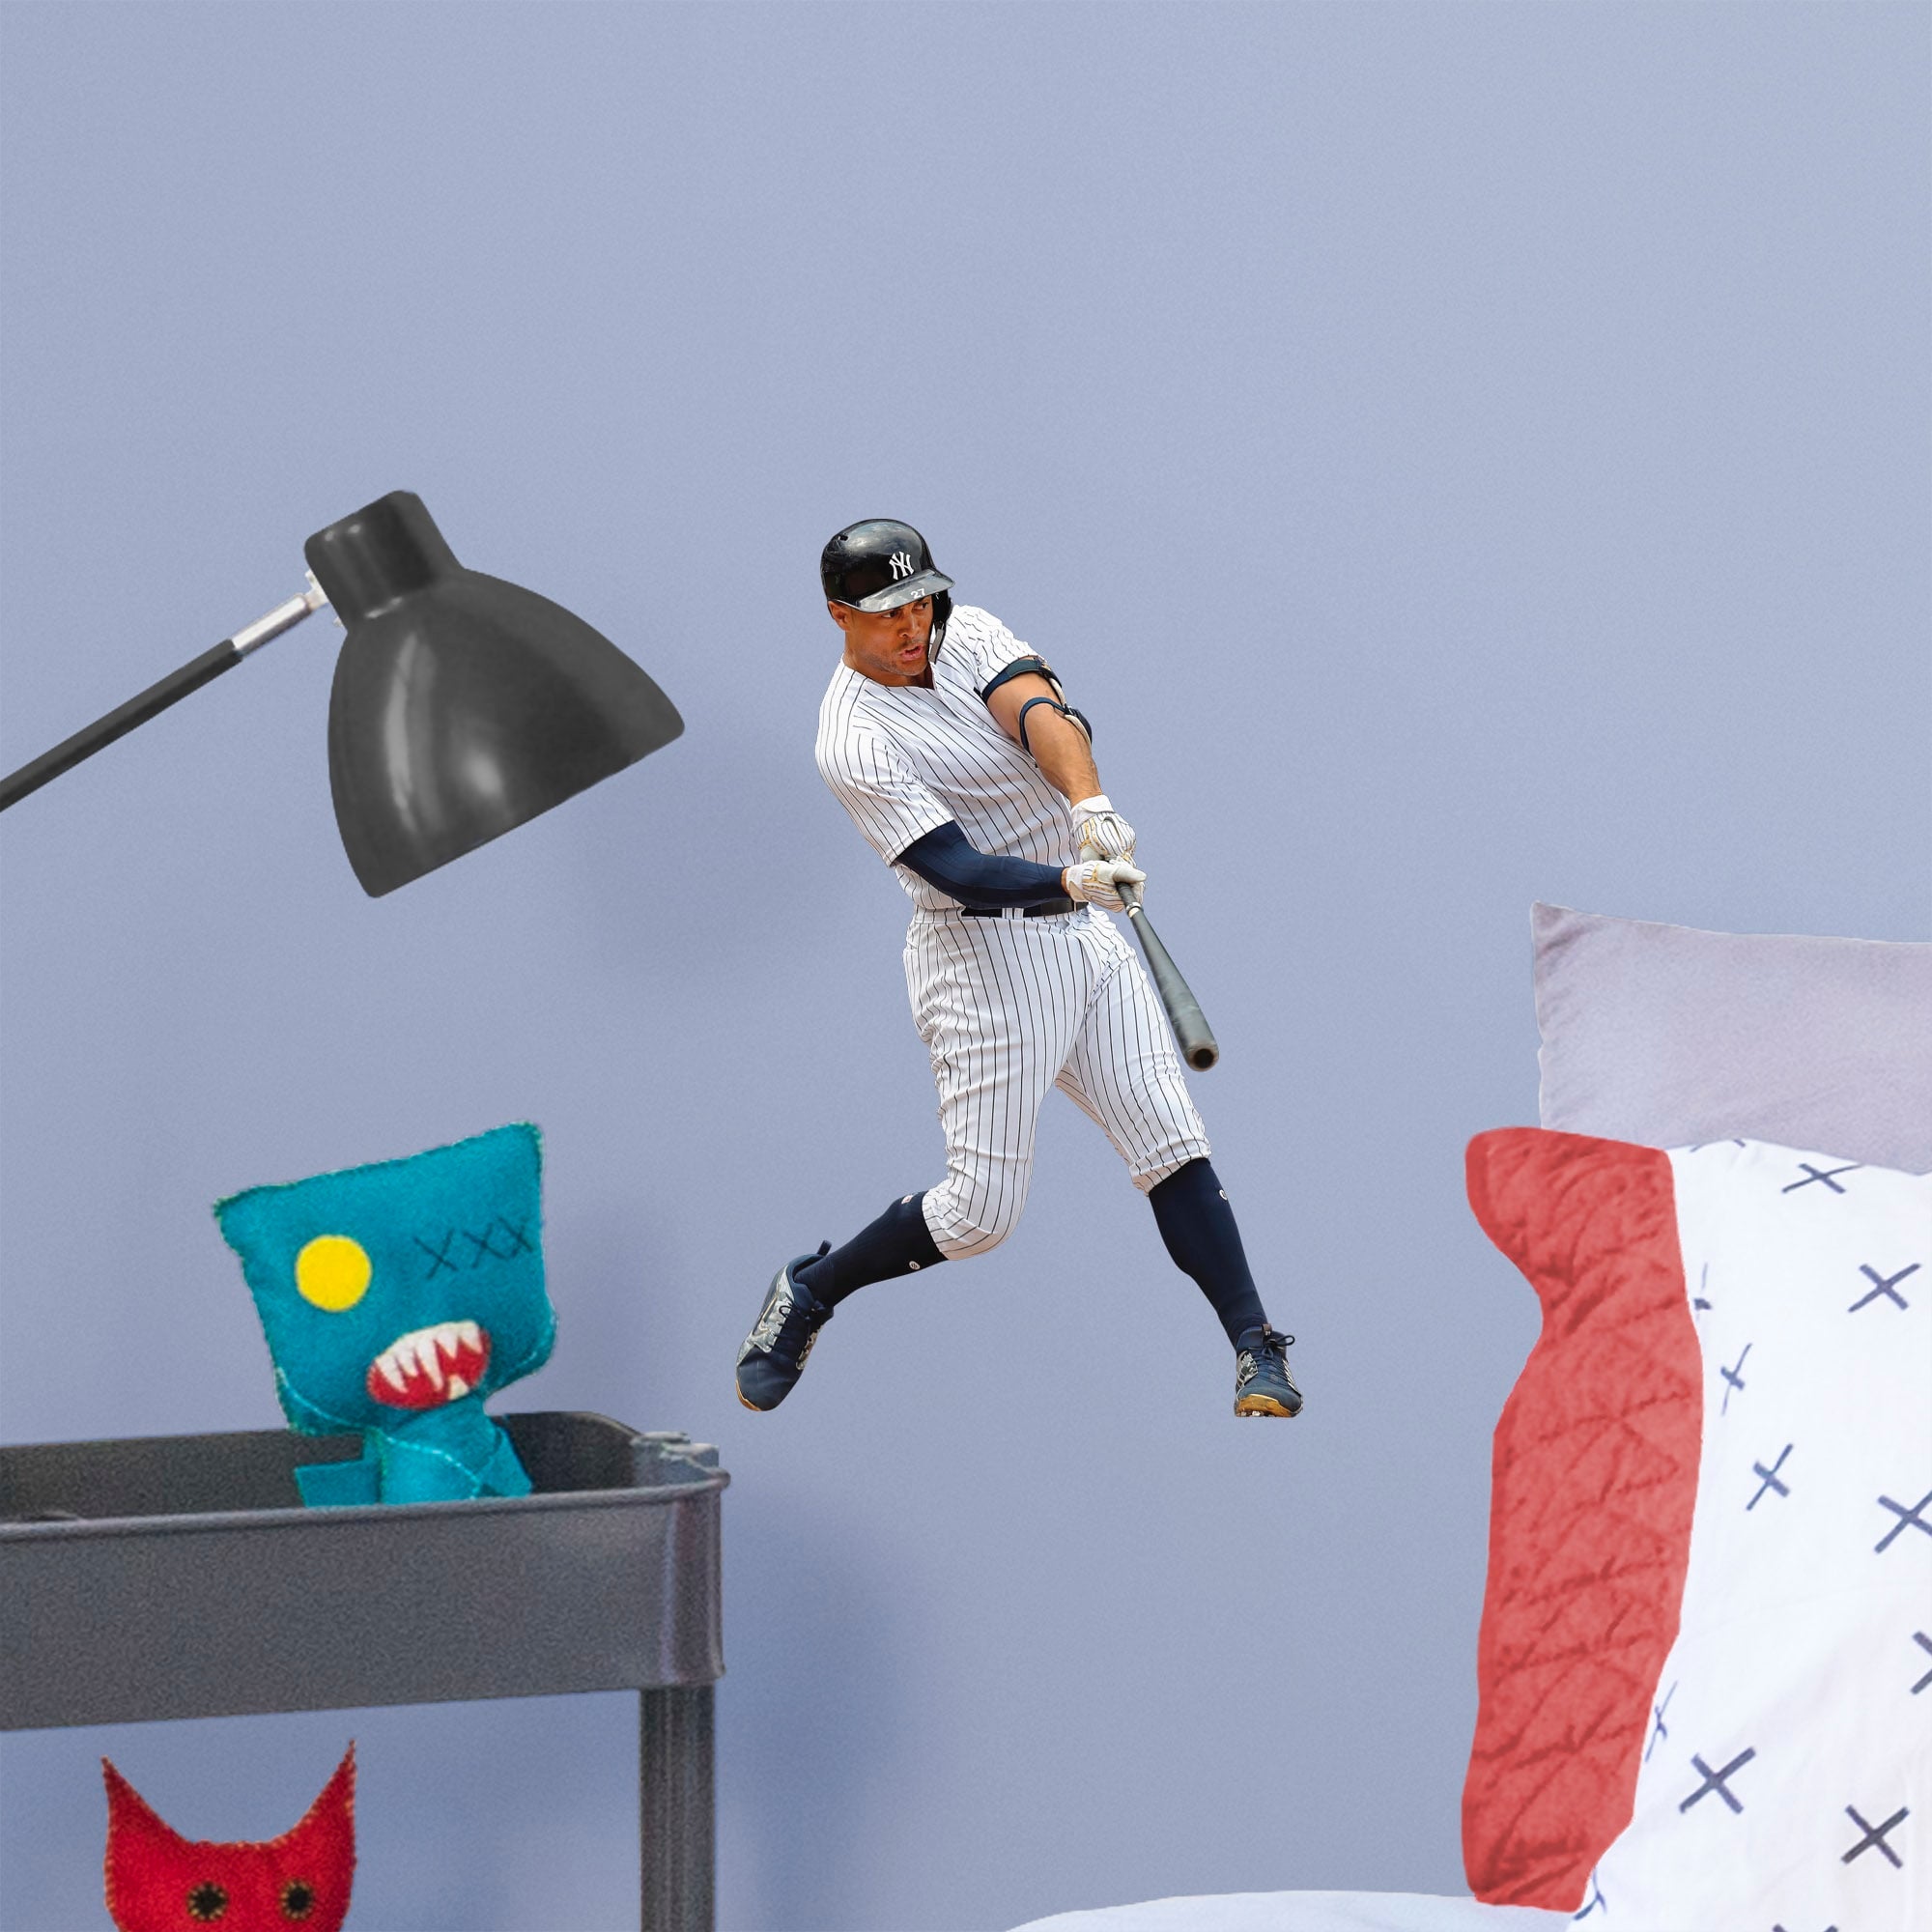 Giancarlo Stanton for New York Yankees: Swing - Officially Licensed MLB Removable Wall Decal Large by Fathead | Vinyl